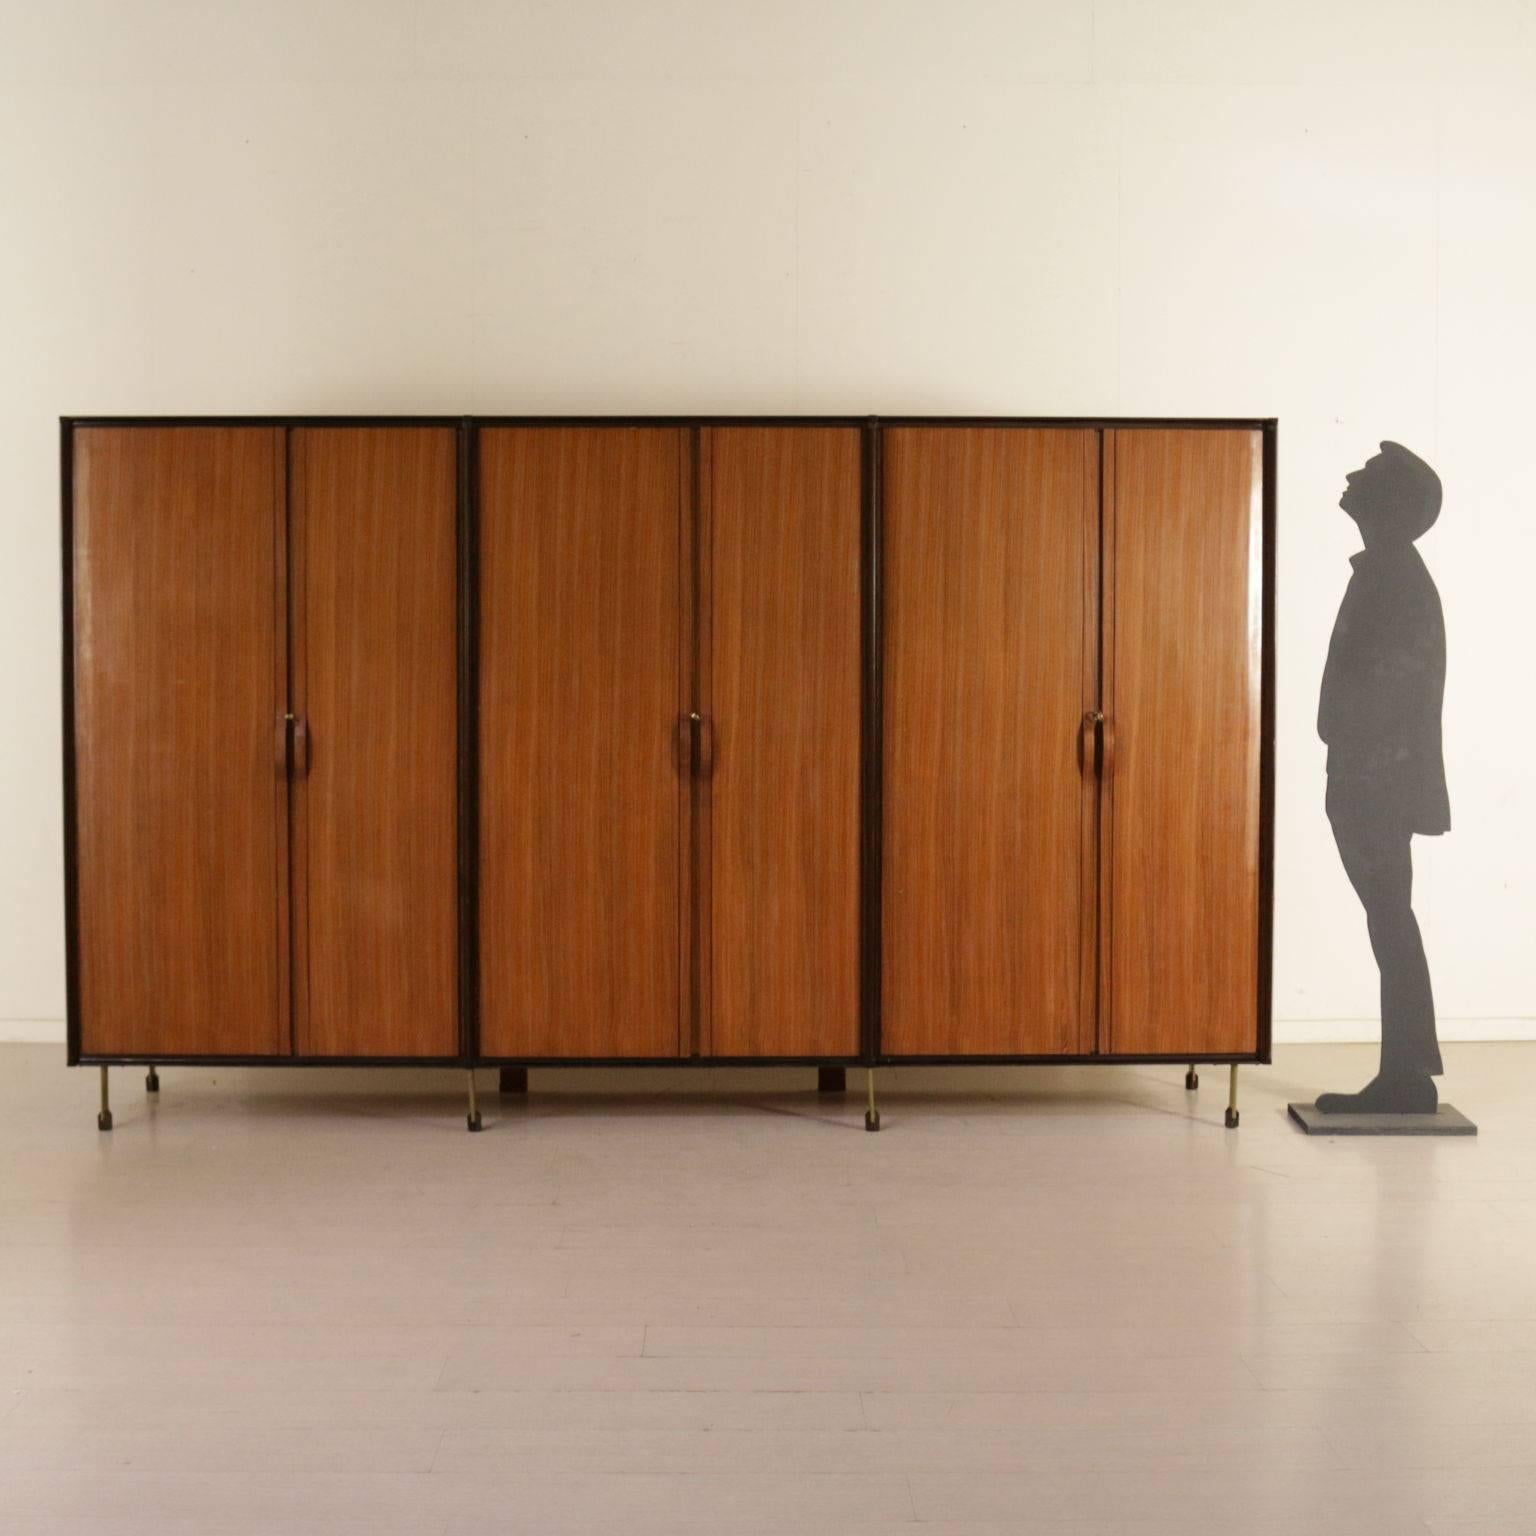 A wardrobe, rosewood veneer, metal and wooden legs. Manufactured in Italy, 1960s.